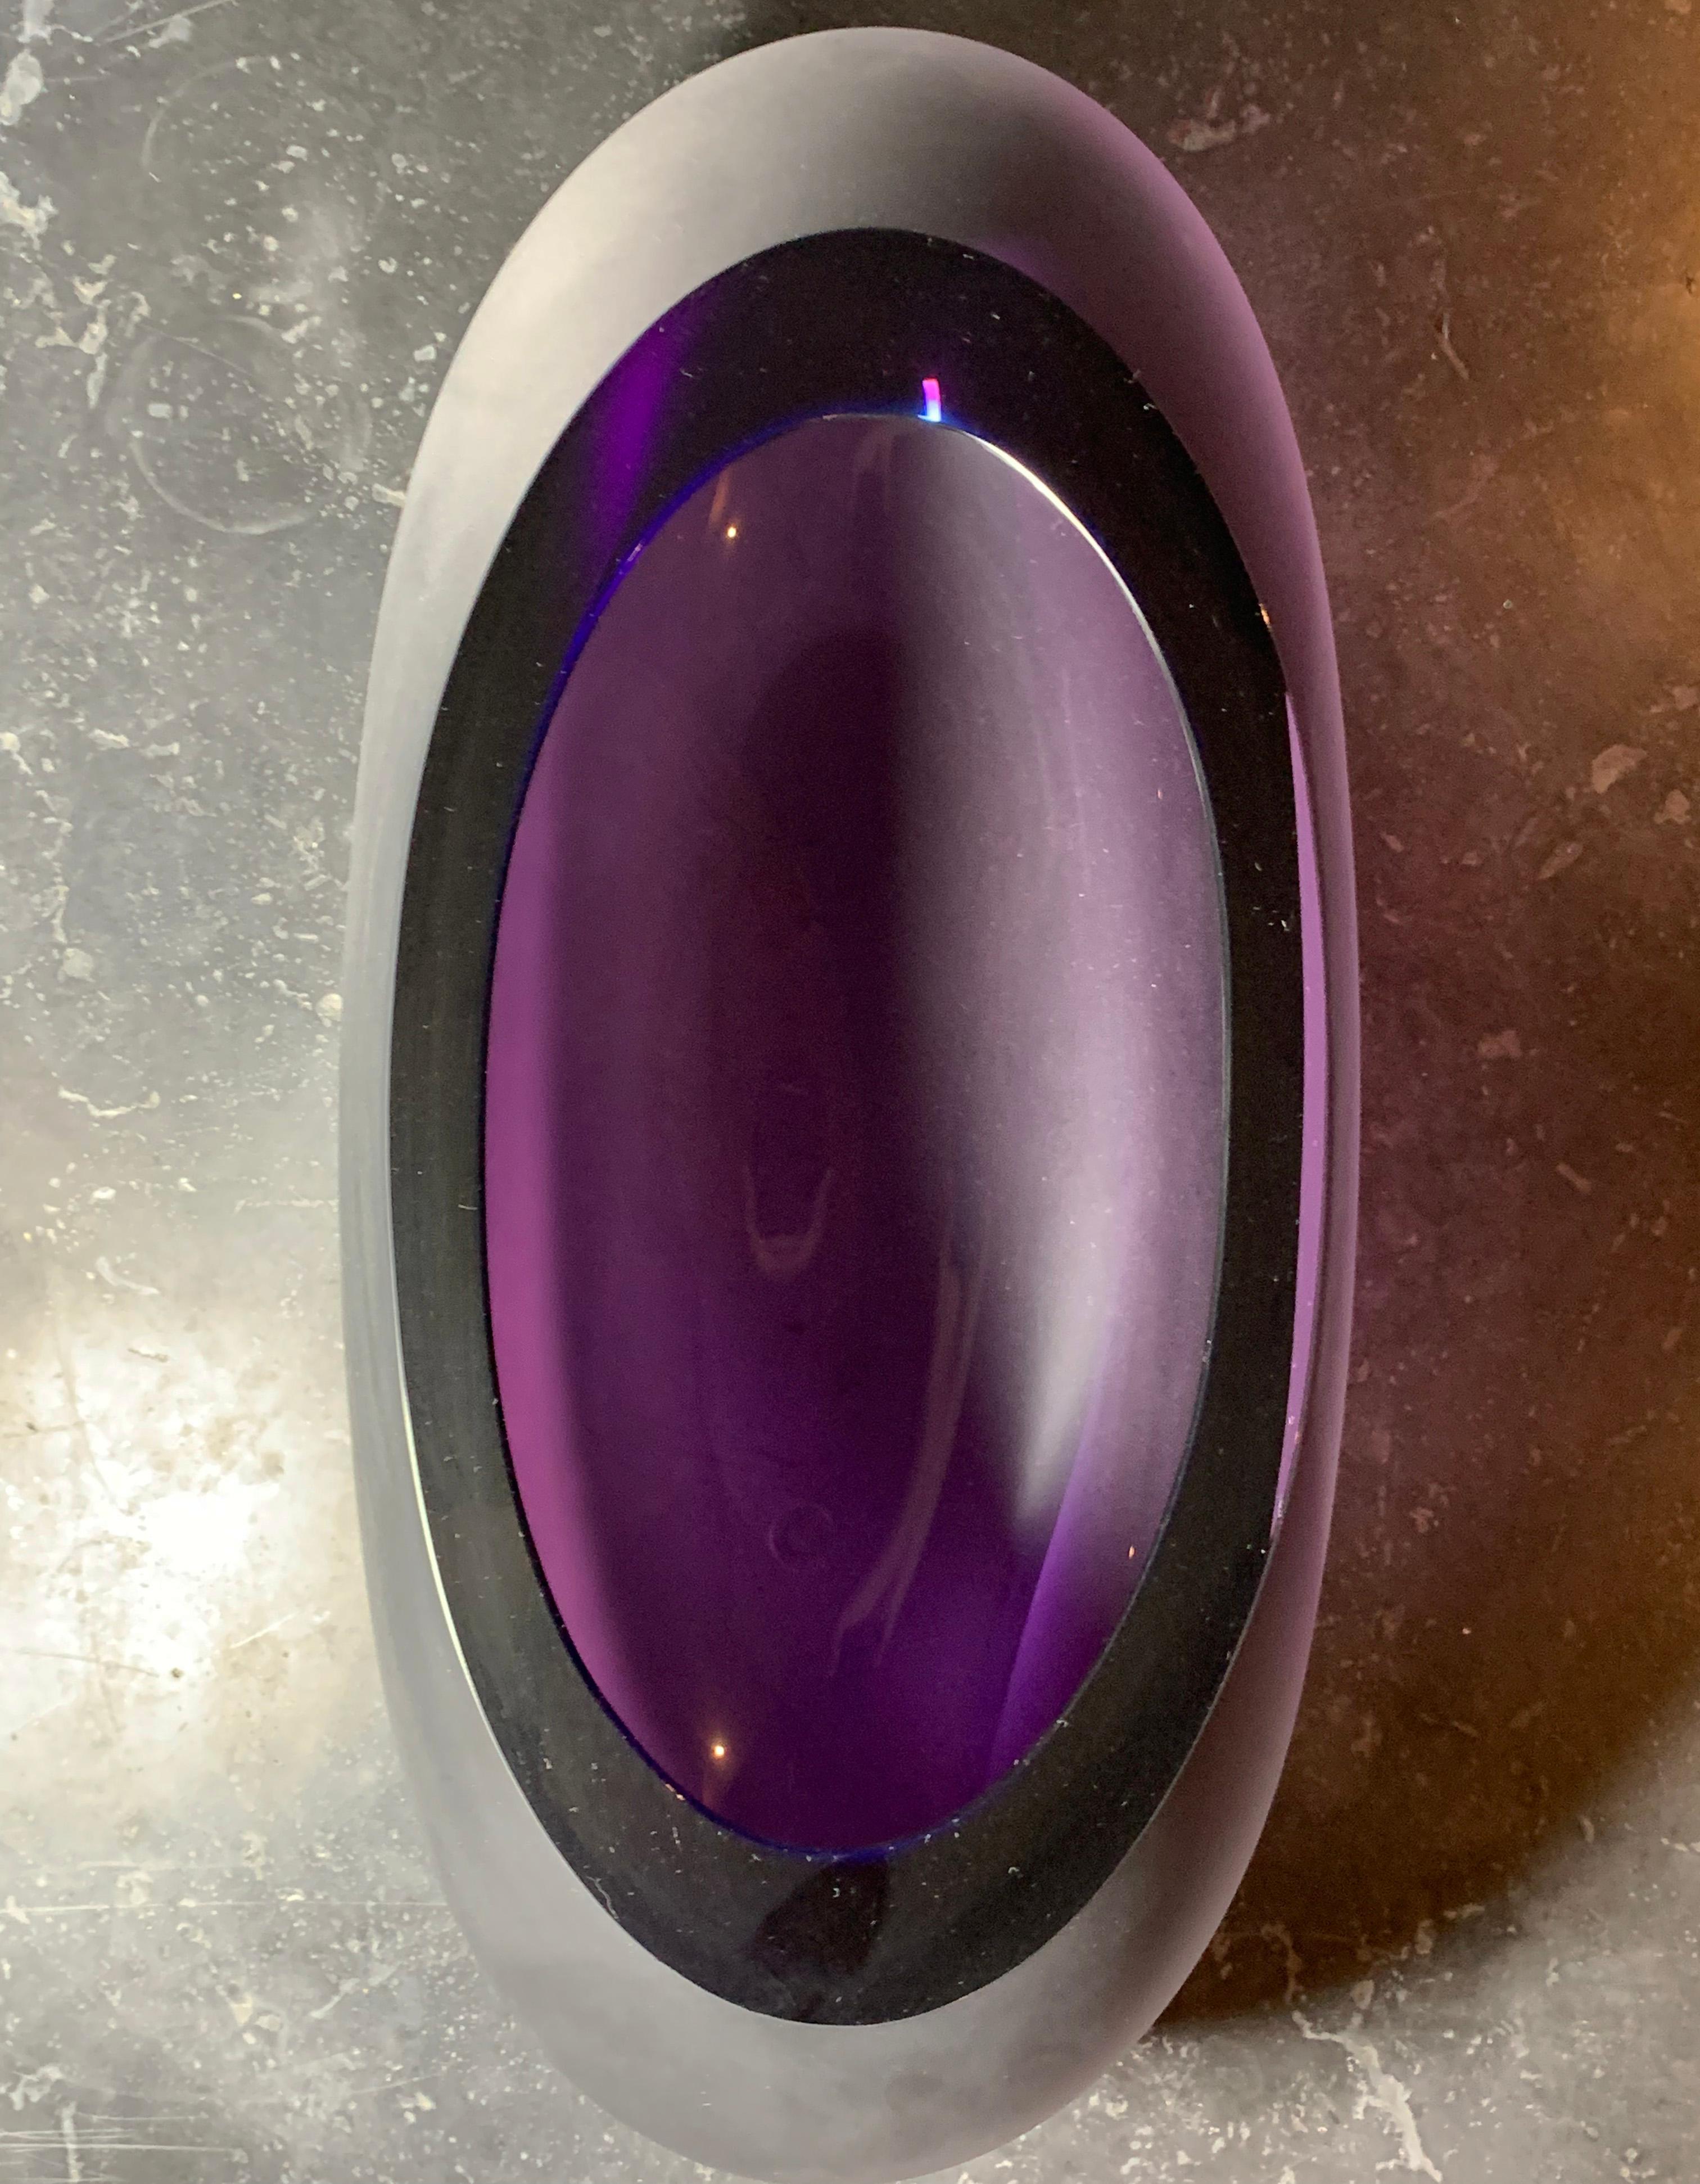 Purple Czech glass 'Kamen' vessel by Anna Torfs.

Frosted externally with a thick polished lip, and polished internally. 

A wonderful example of the work of Anna Torfs - this piece is signed and numbered on the vessel base.